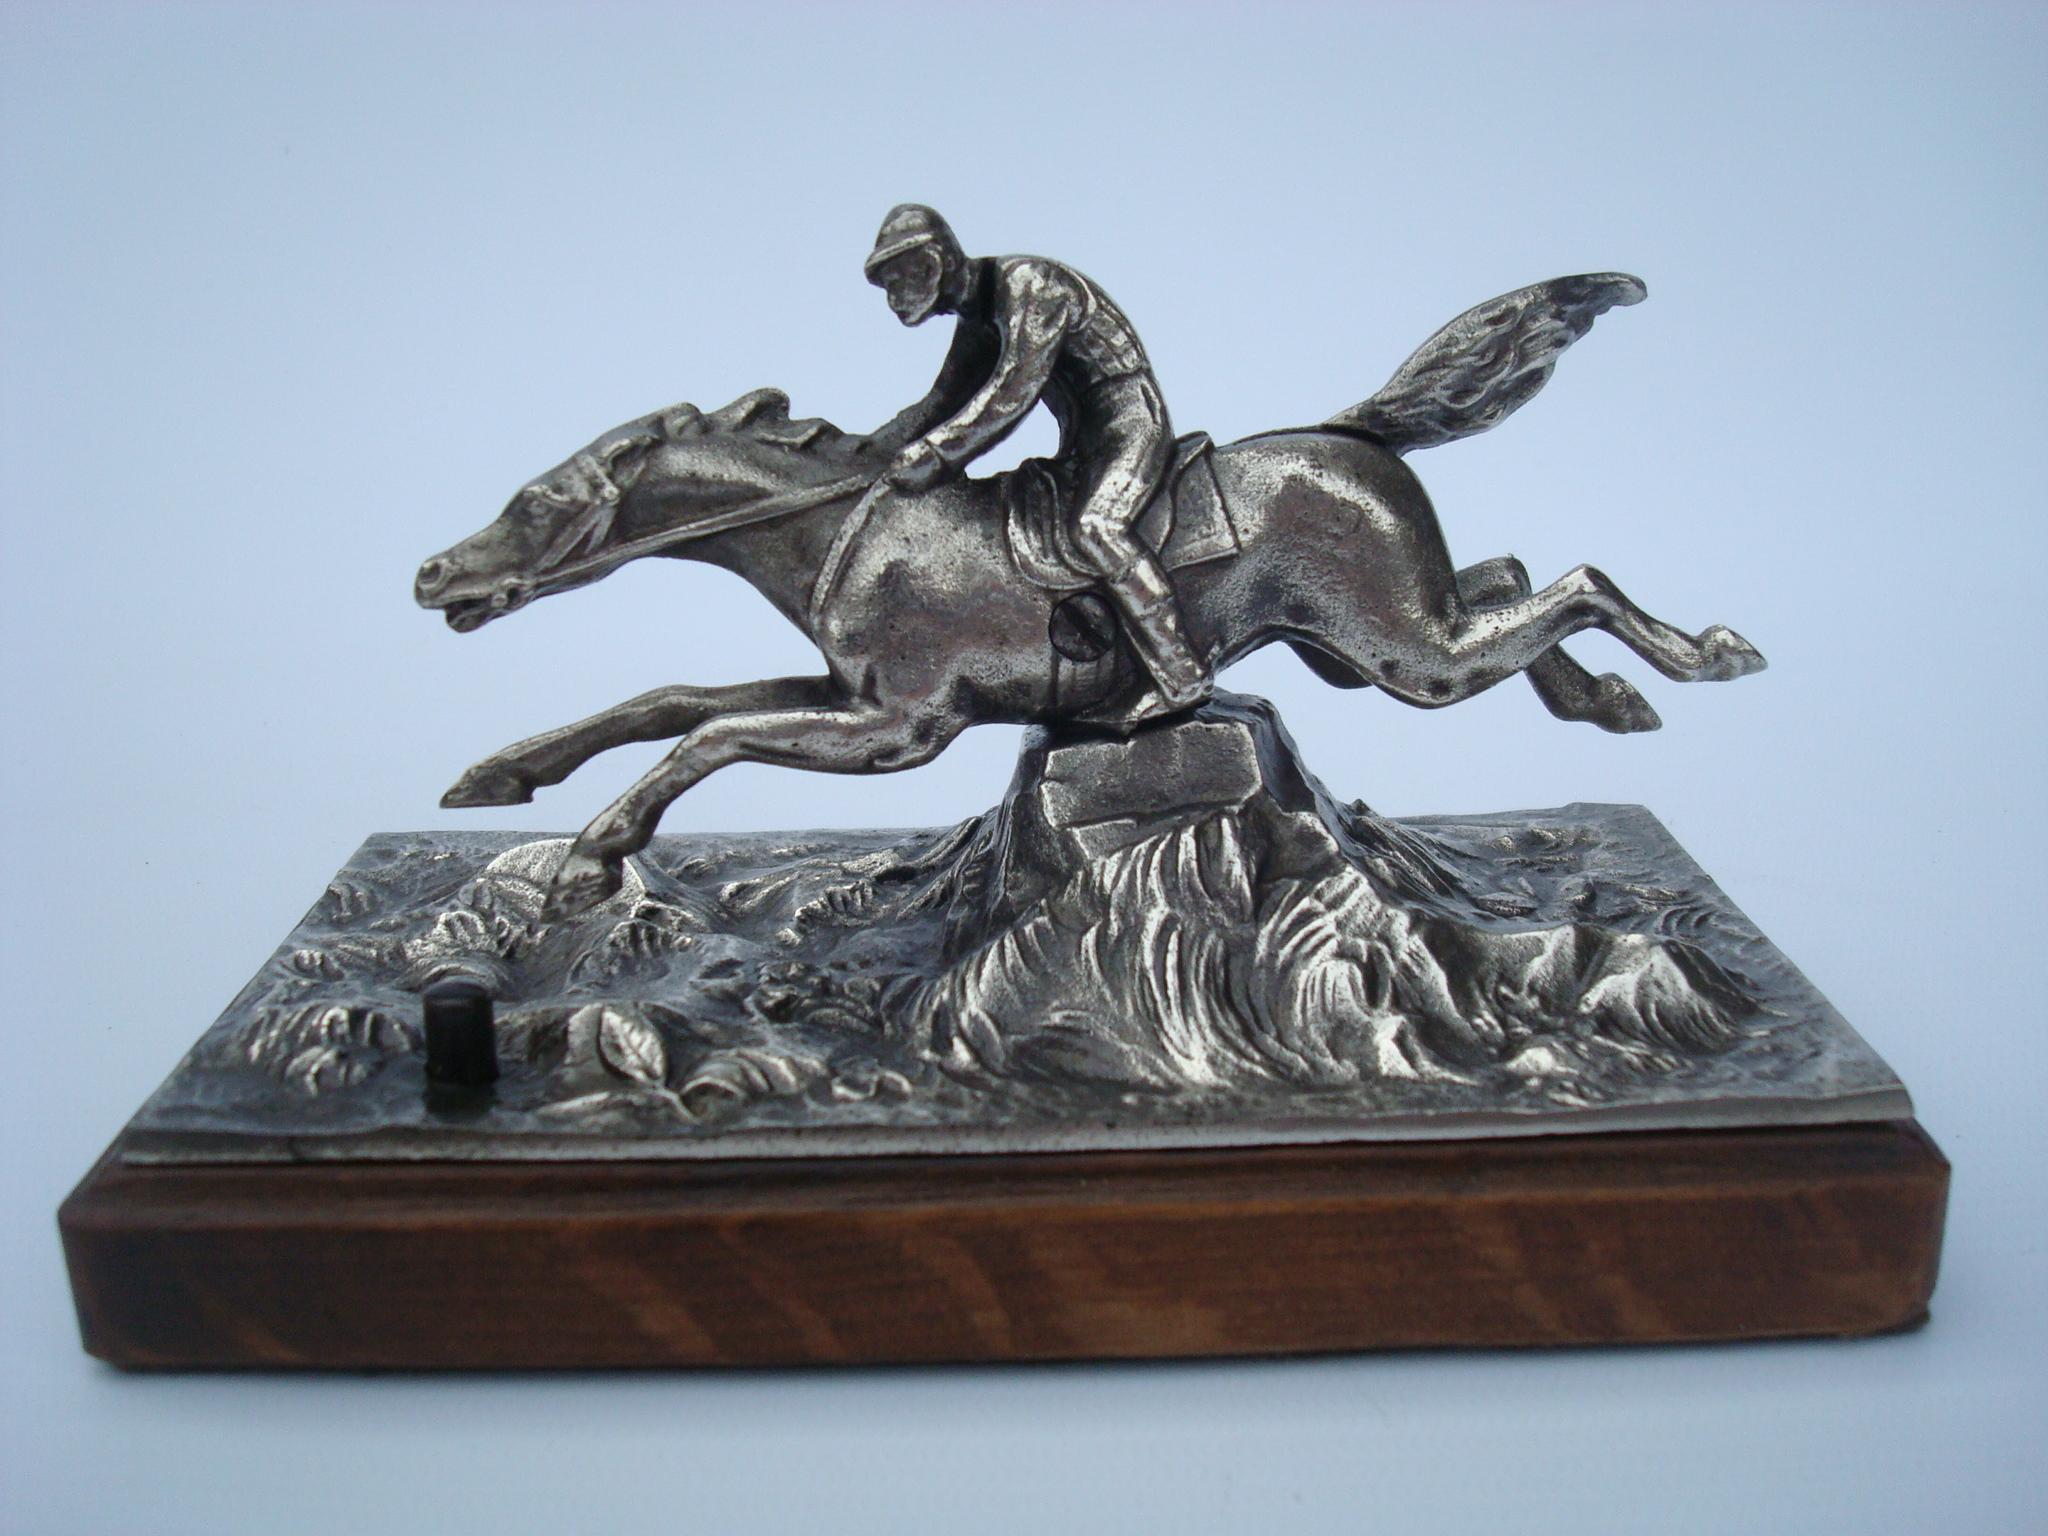 Equestrian silvered bronze table push bell.
Man riding a horse, or as soon in several british drawings, it can be a fox hunting scene. Classy way to signal your butler!
It has a wonderful presence.